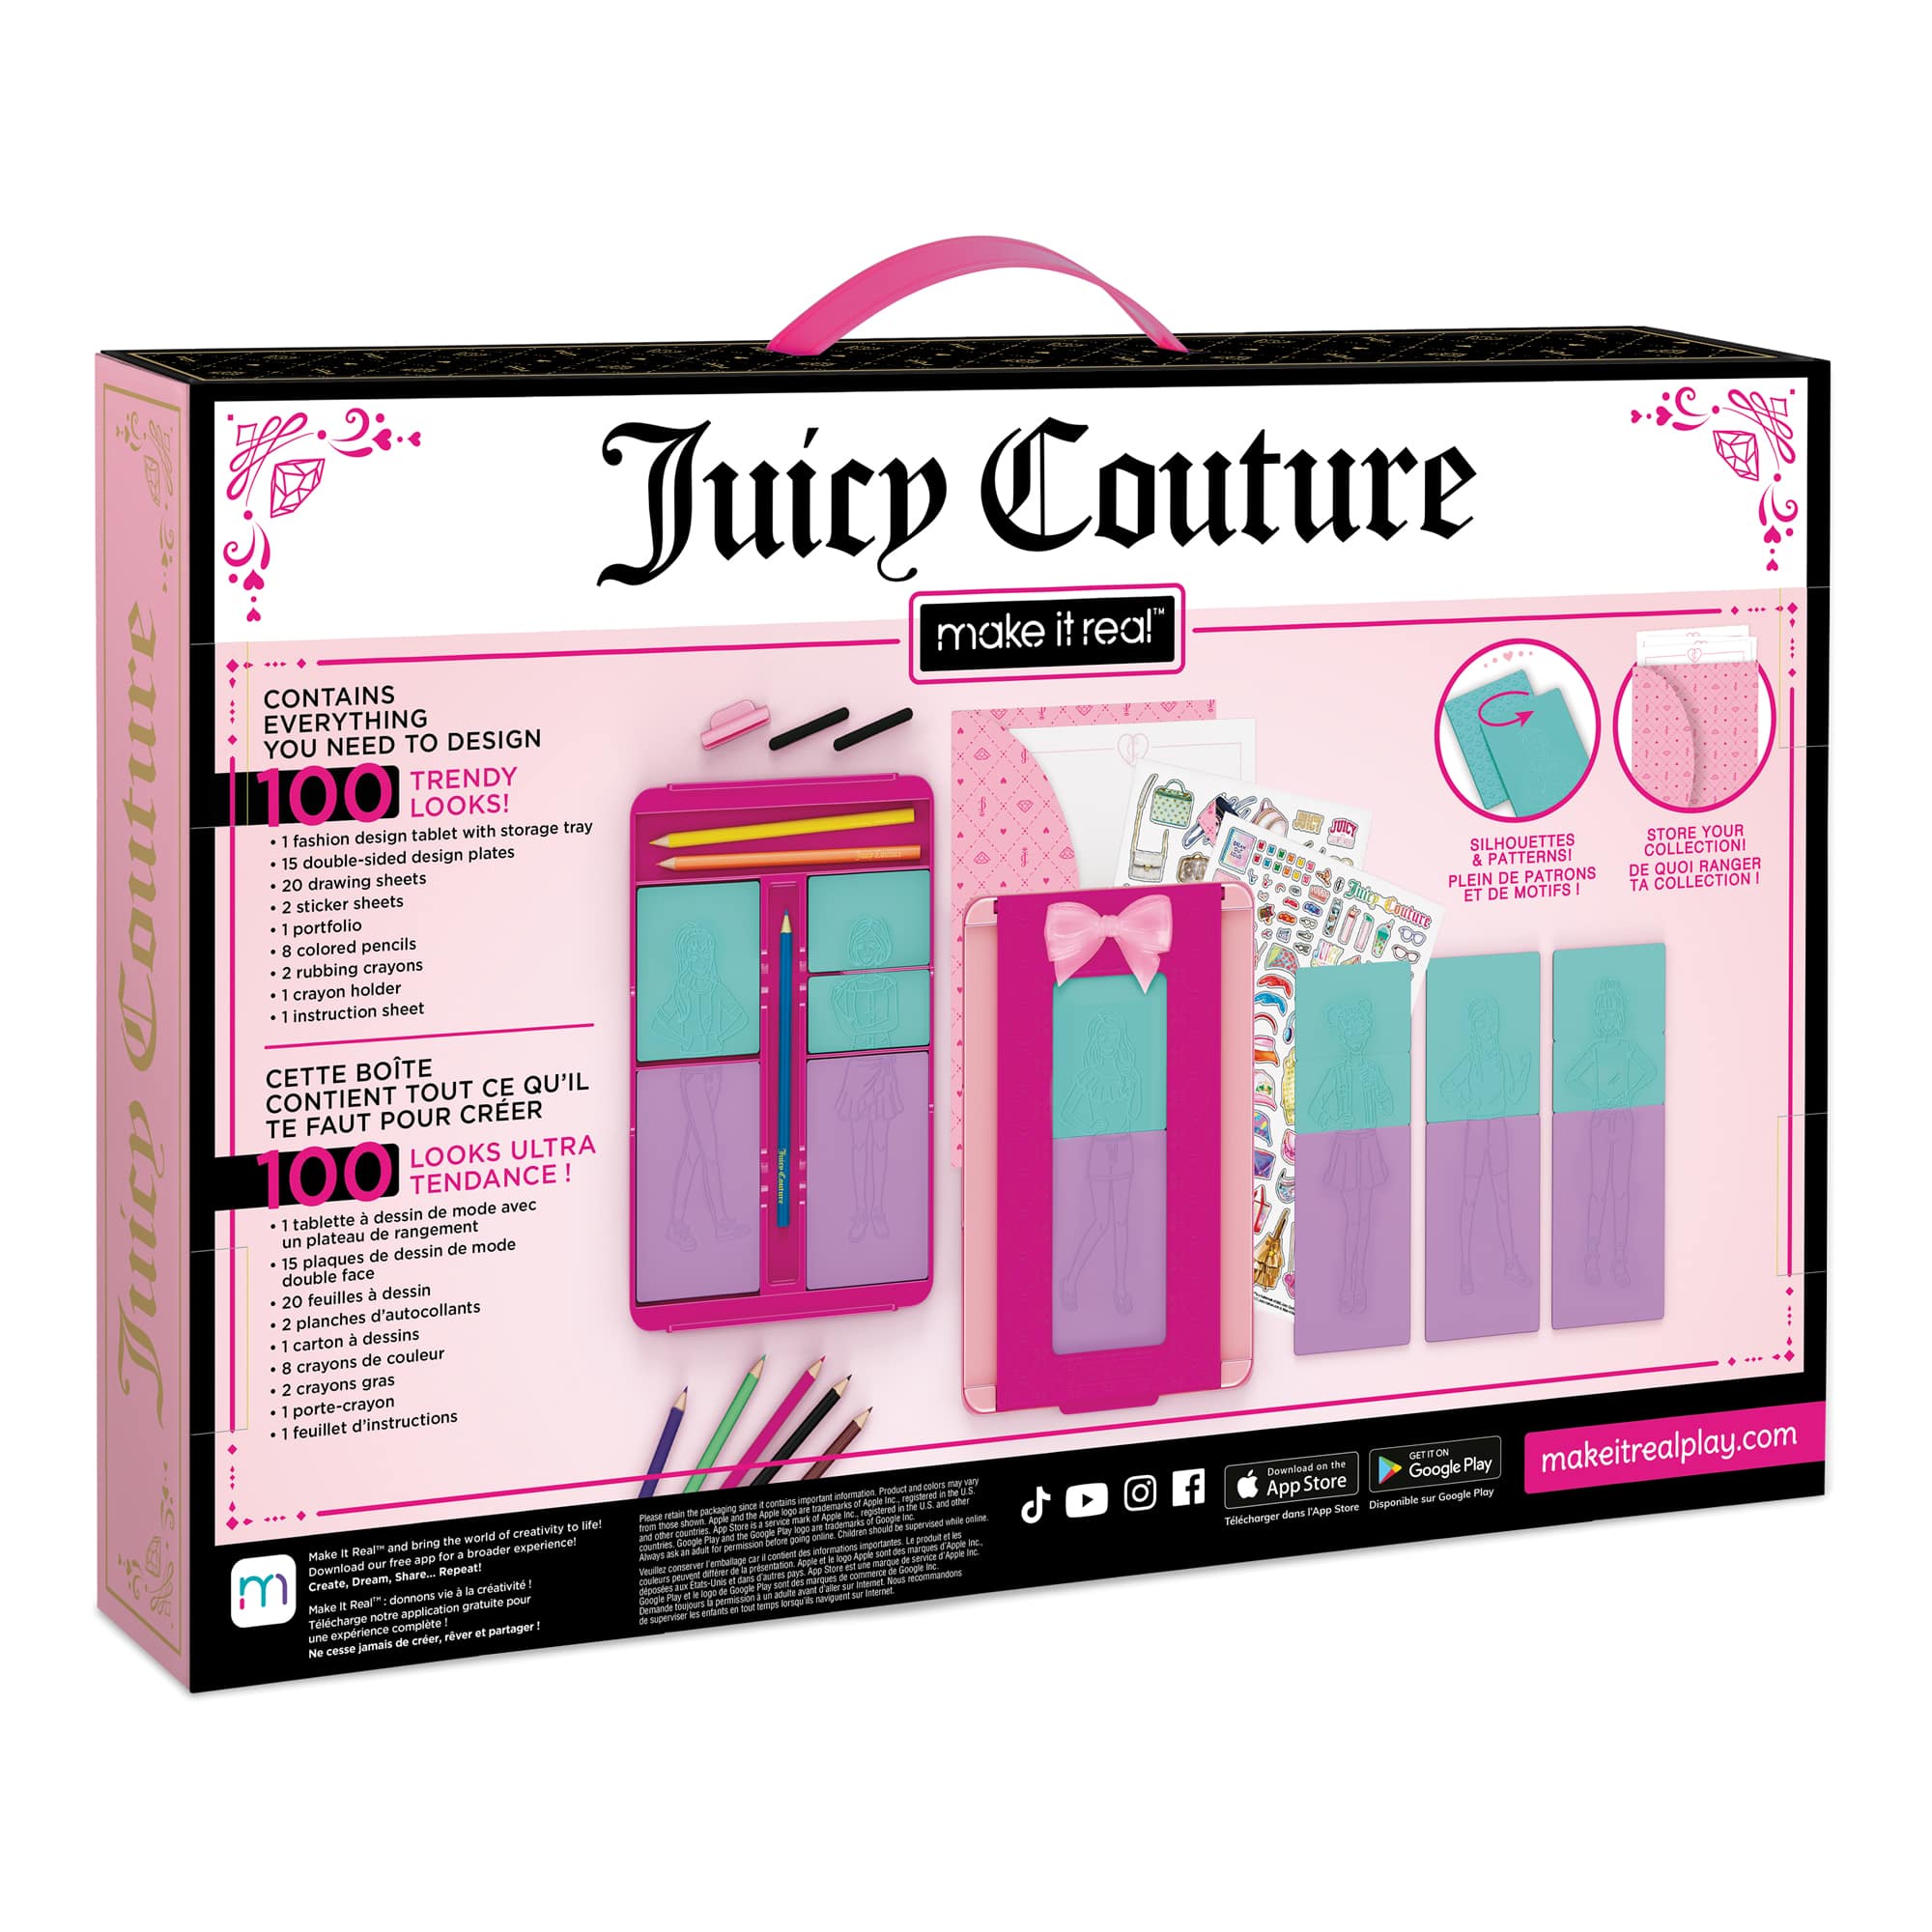 Kohl's Launches Juicy Couture in Effort to Shore up Branded Offering